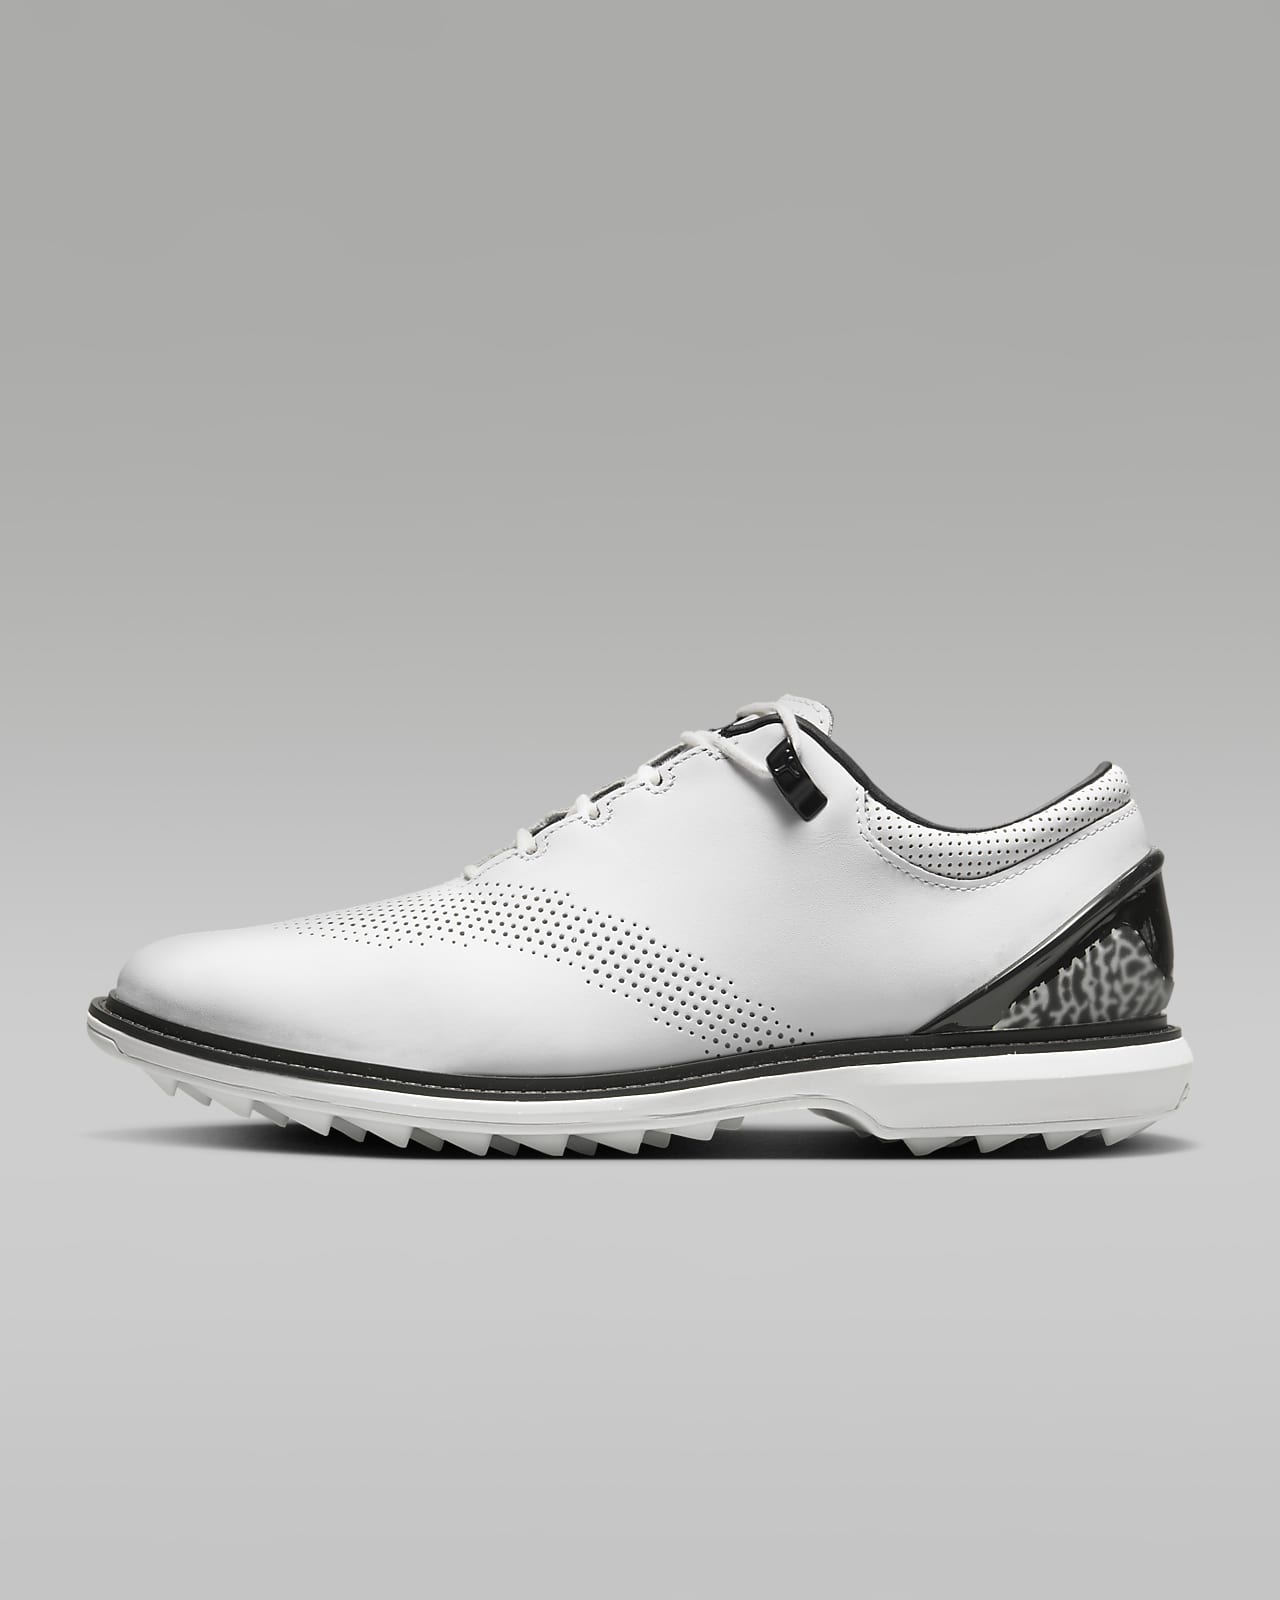 Performance Features of Jordan Golf Shoes